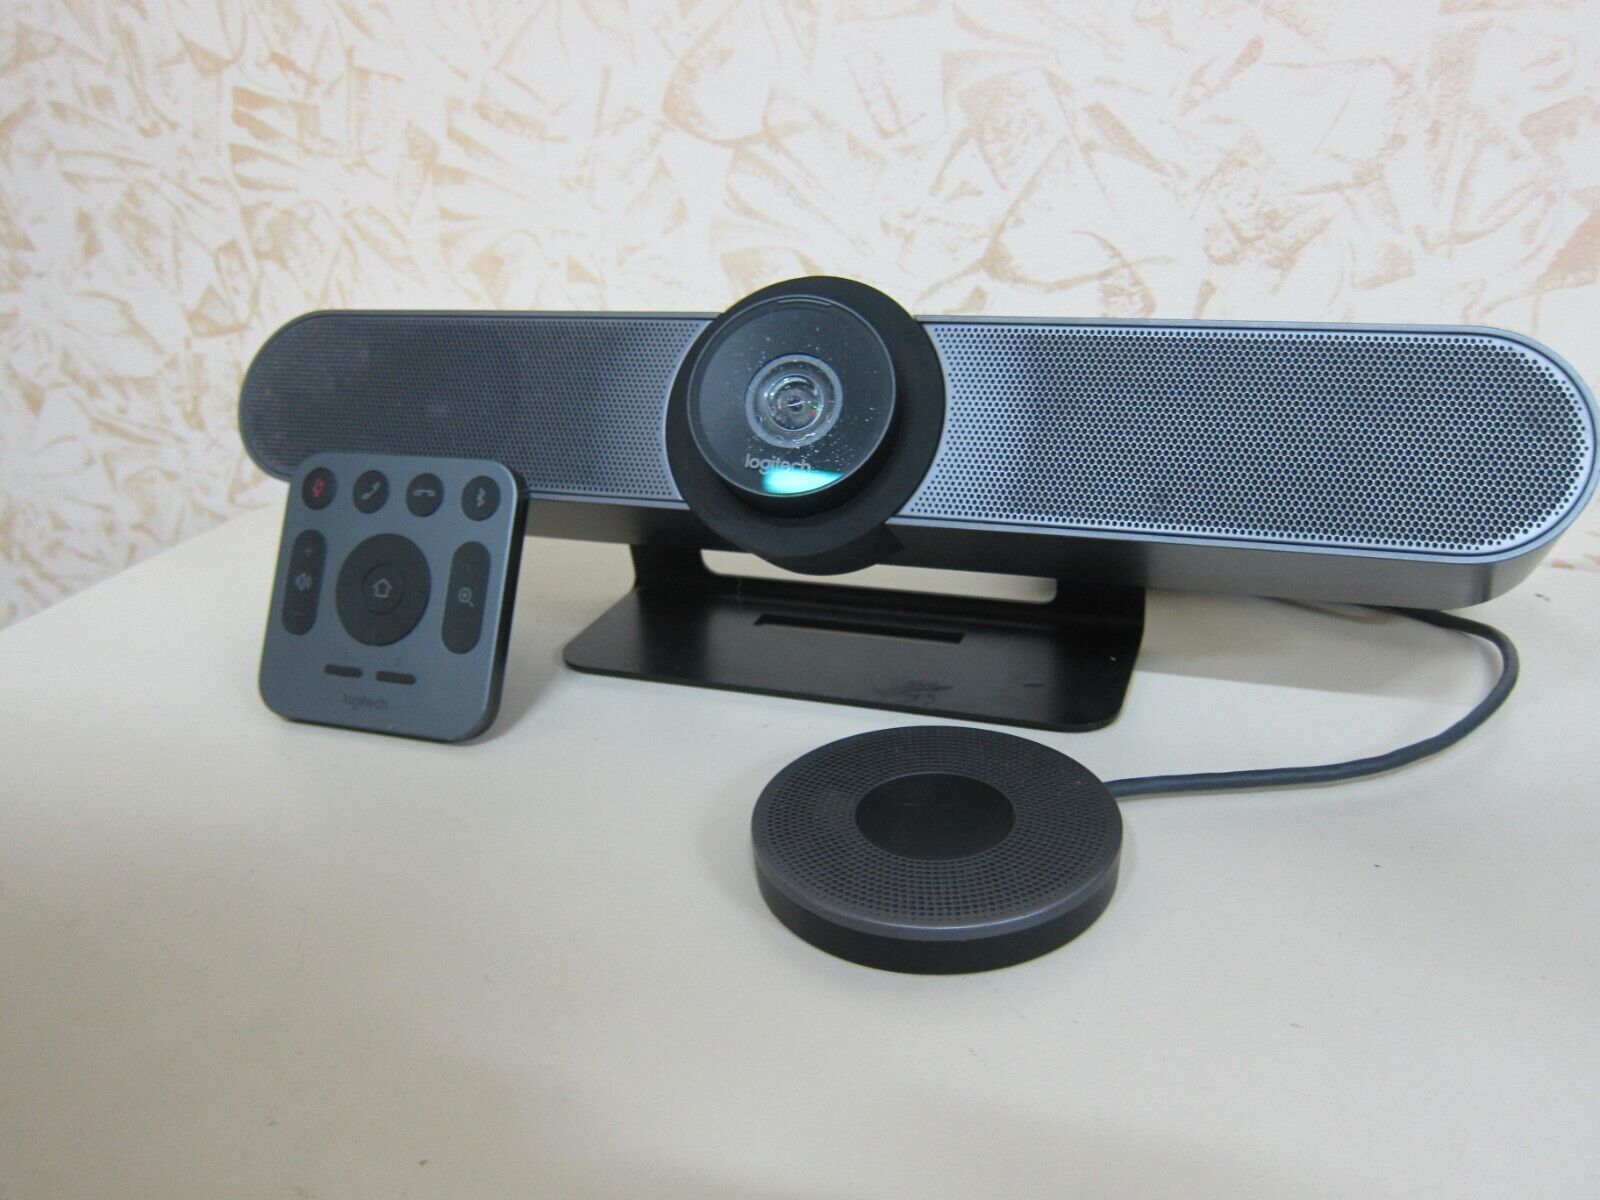 Logitech Meetup (960001201) Expansion Mic Video Conferencing TV Mount